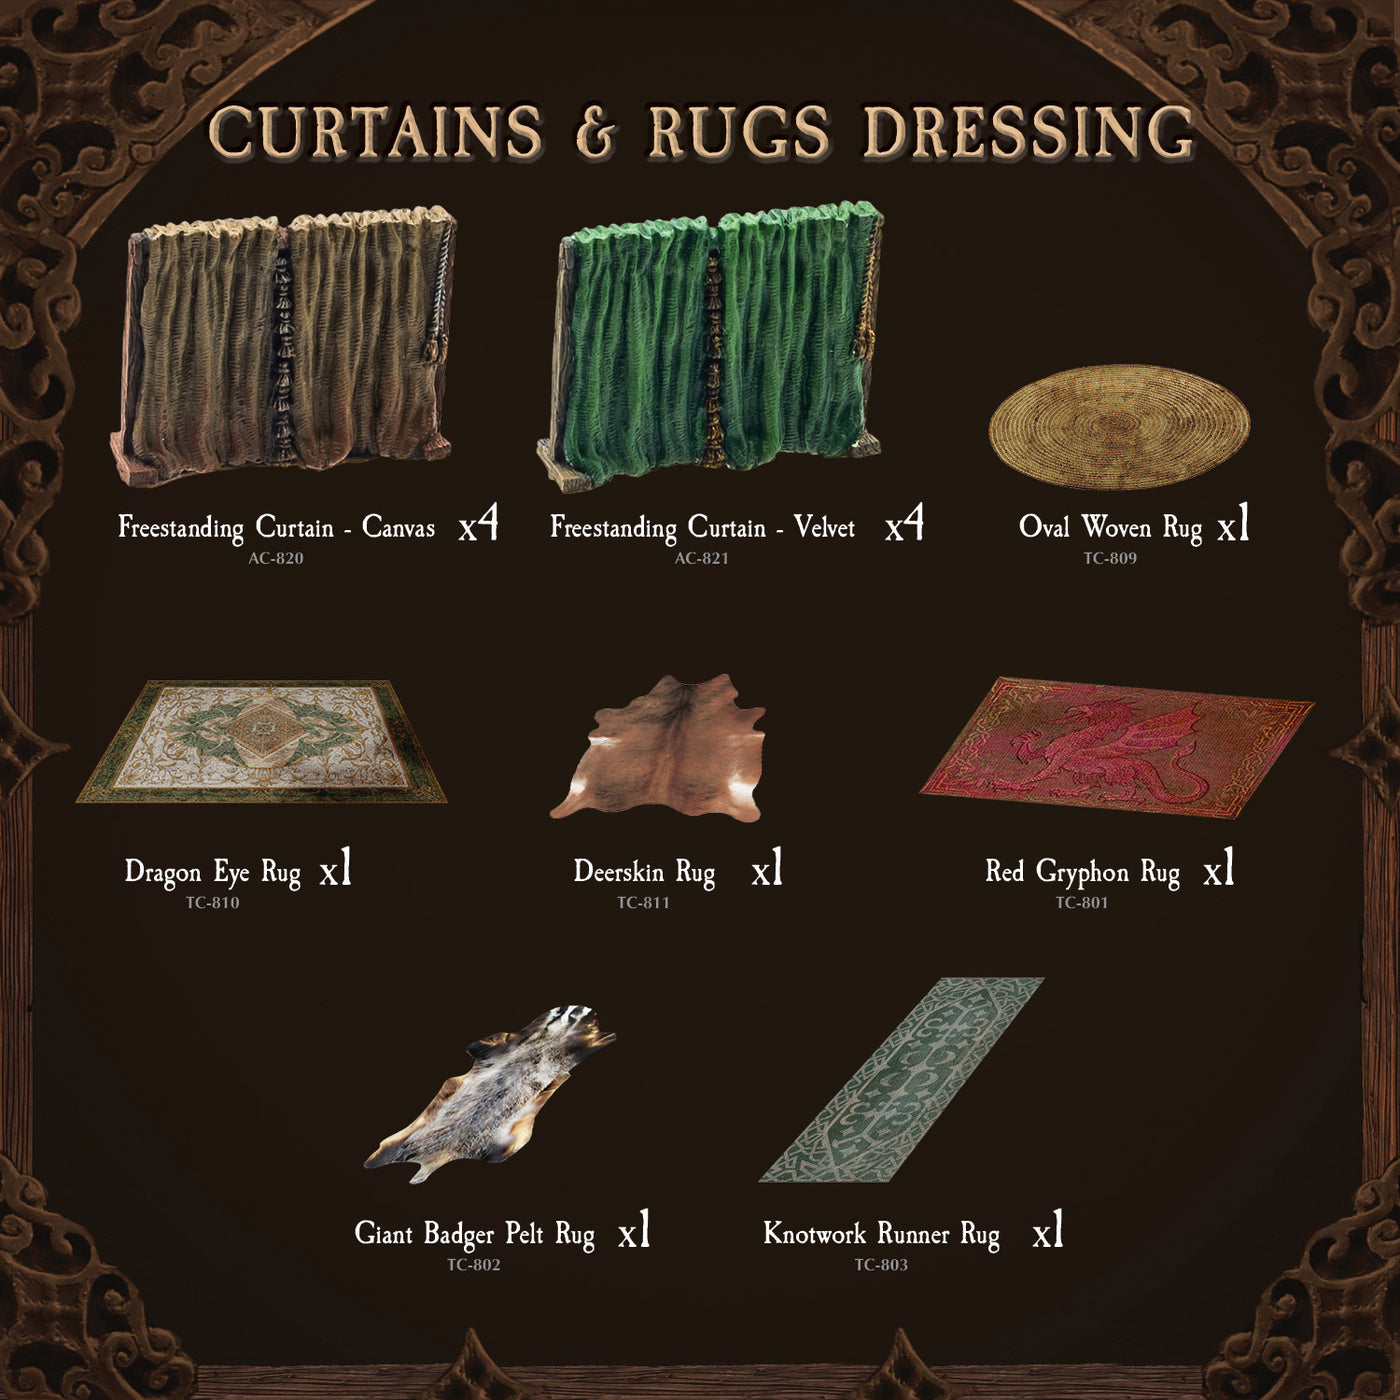 Curtains & Rugs Dressing (Painted)